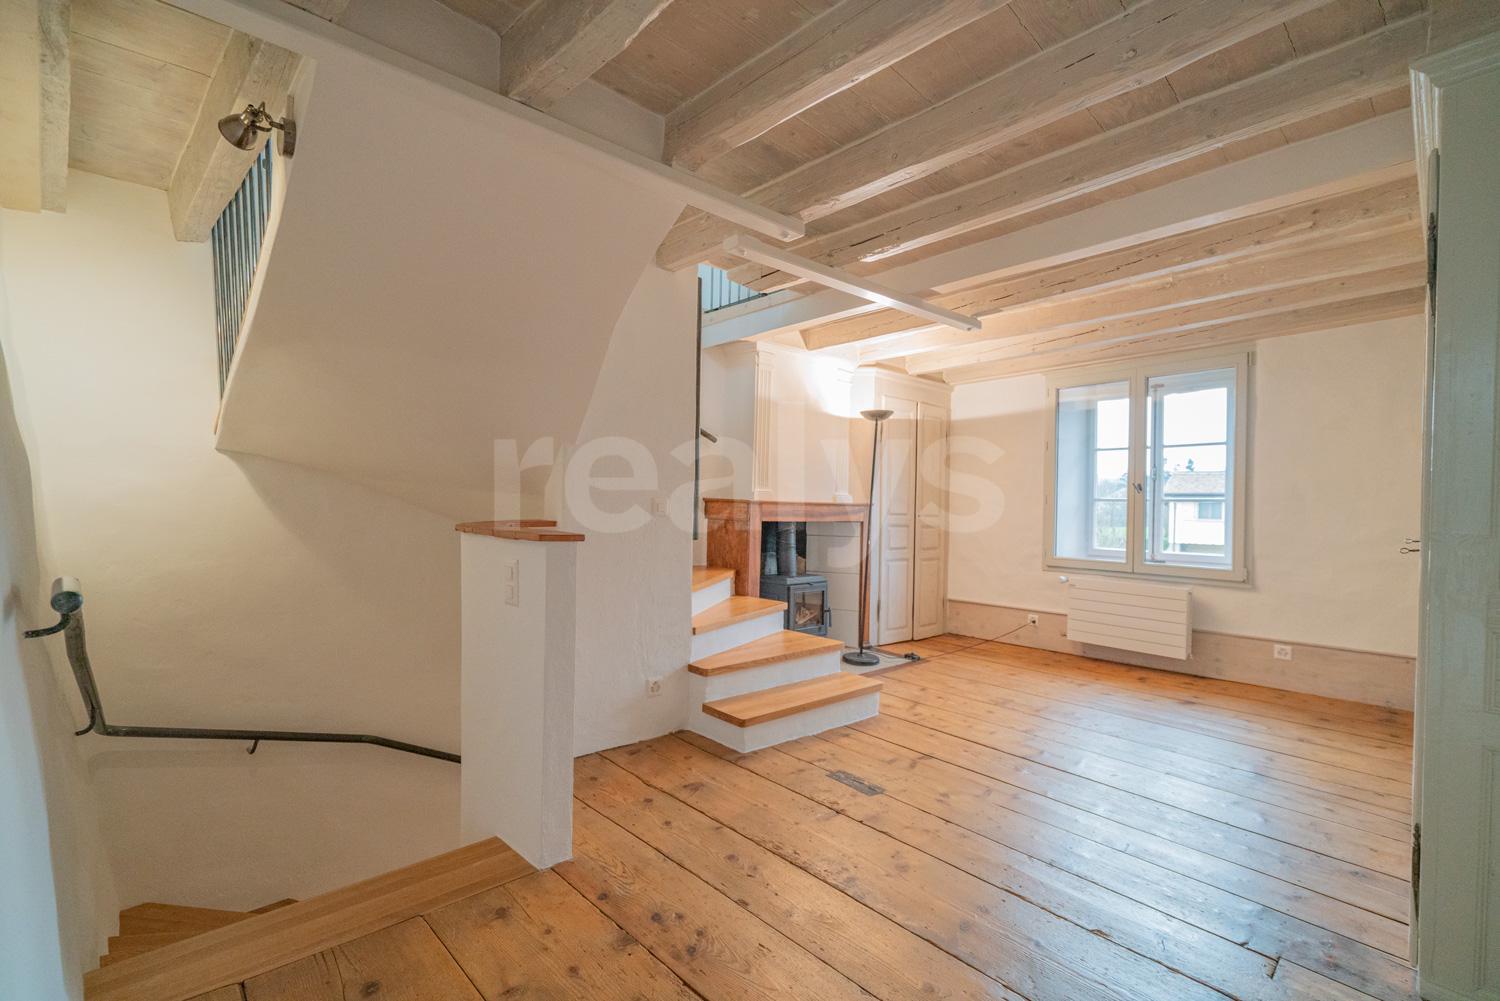 PrivaliaCharming renovated flat in an old building